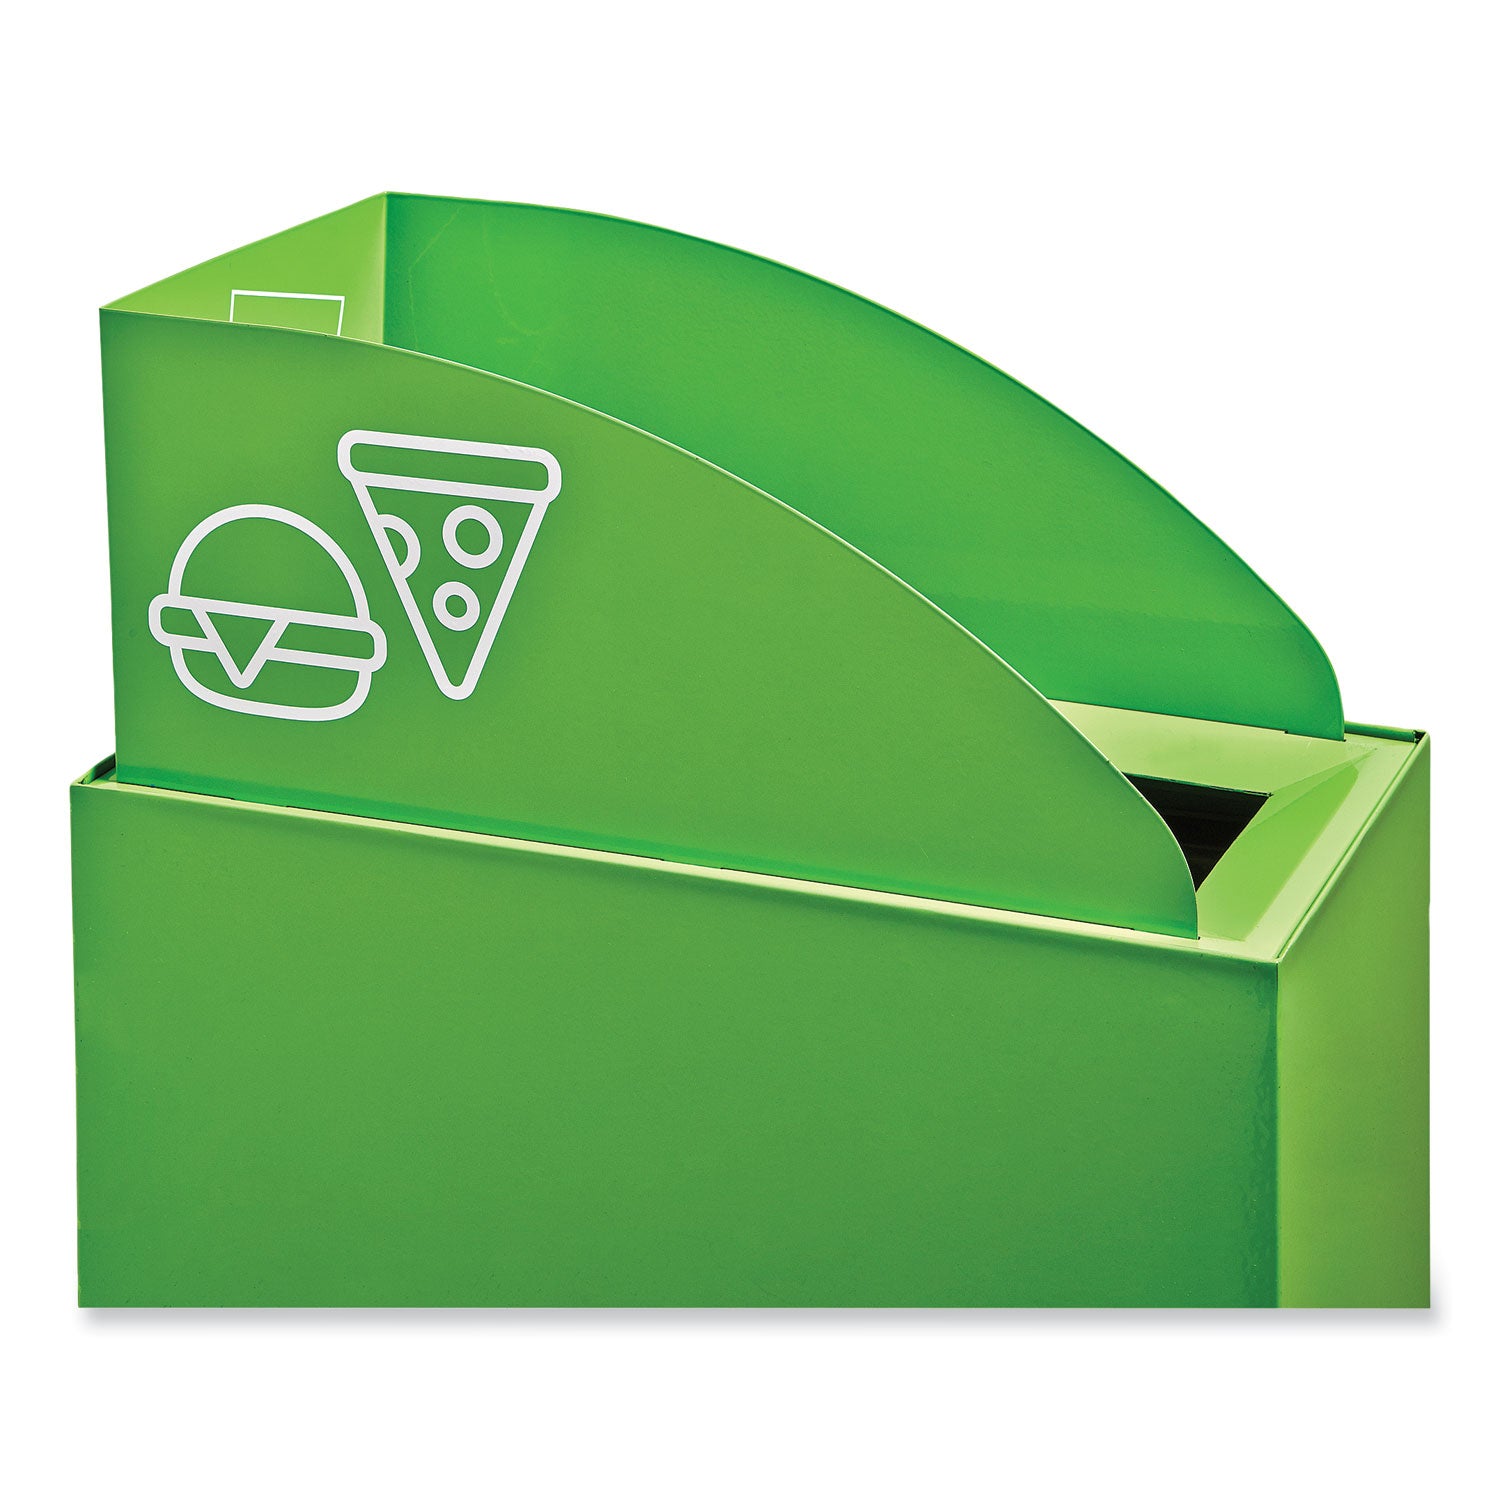 mixx-recycling-center-lid-topper-style-987w-x-1987d-x-062h-green-ships-in-1-3-business-days_saf9449gn - 7